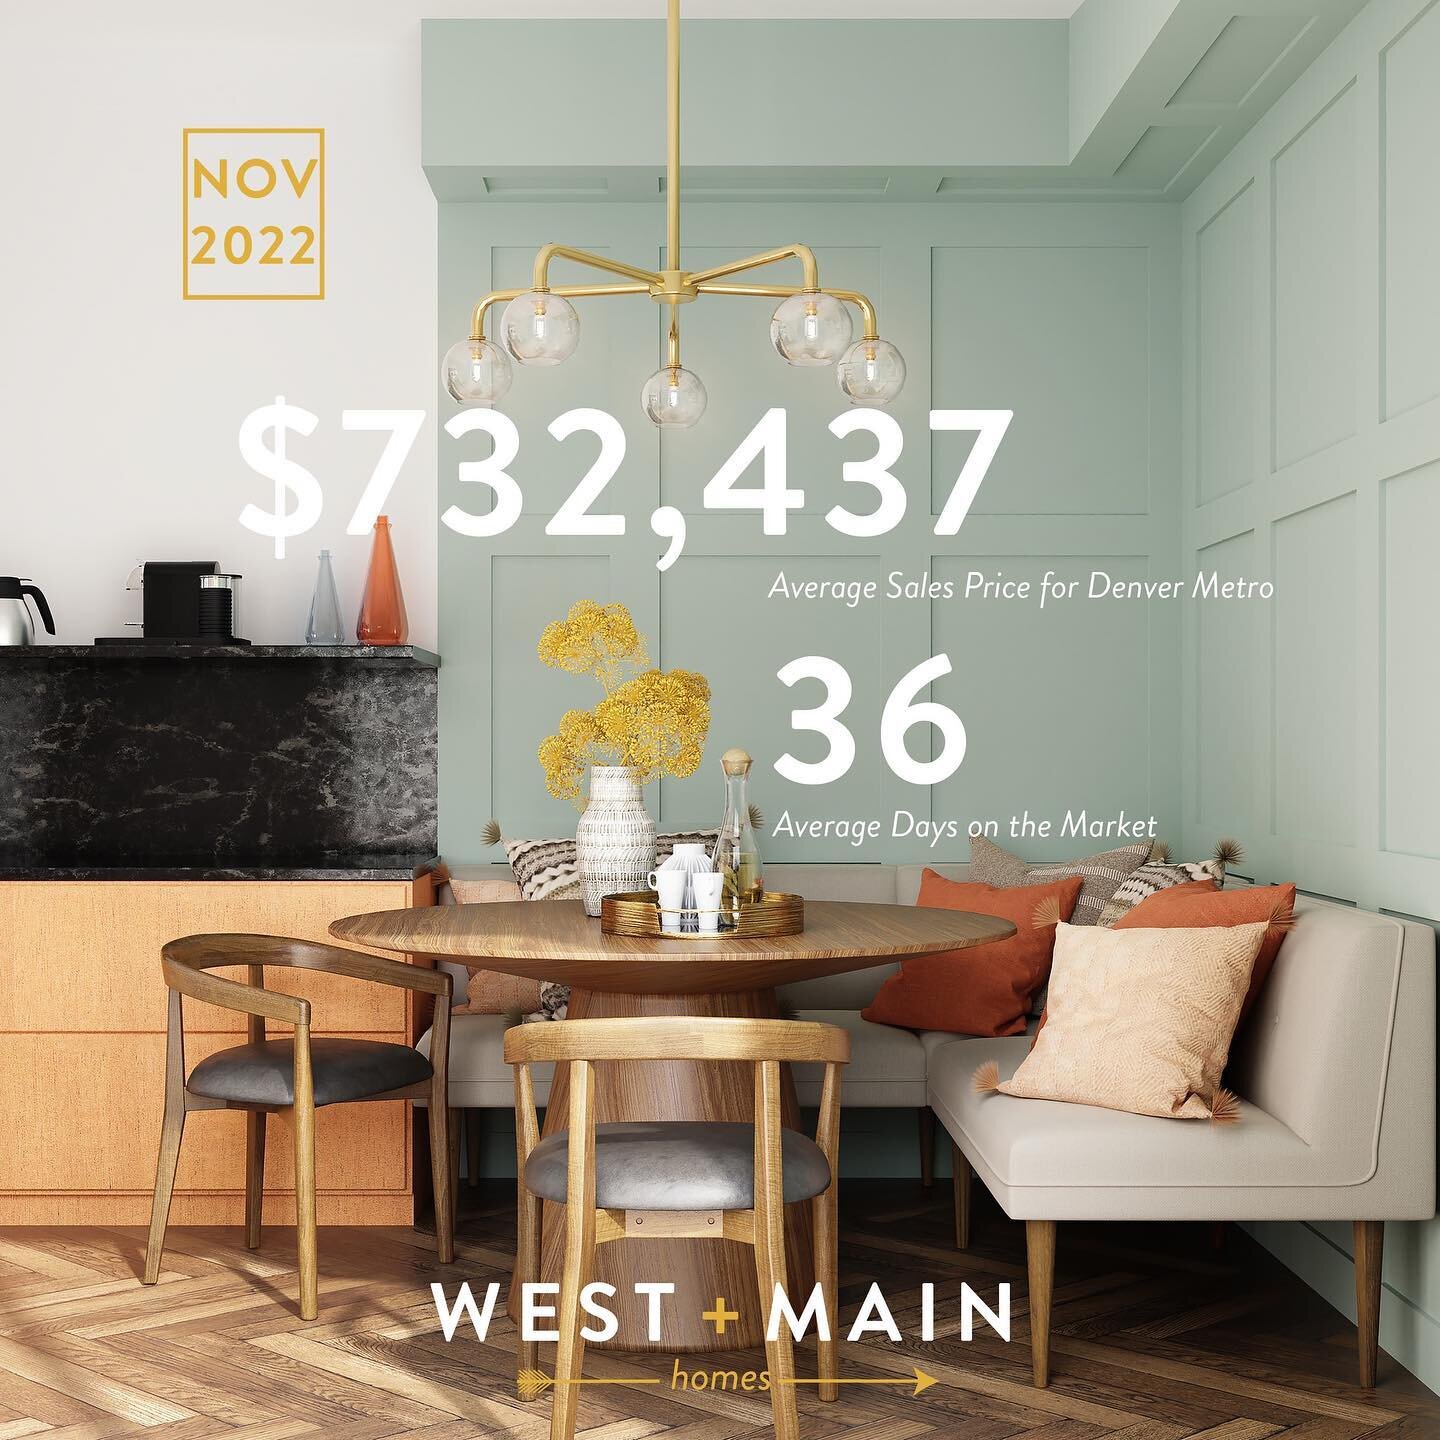 November stats are in! While inventory increased from last year, the market is still witnessing the typical end-of-the-year inventory decrease, which is likely a result of homeowners choosing to either wait to list their homes until the New Year or r